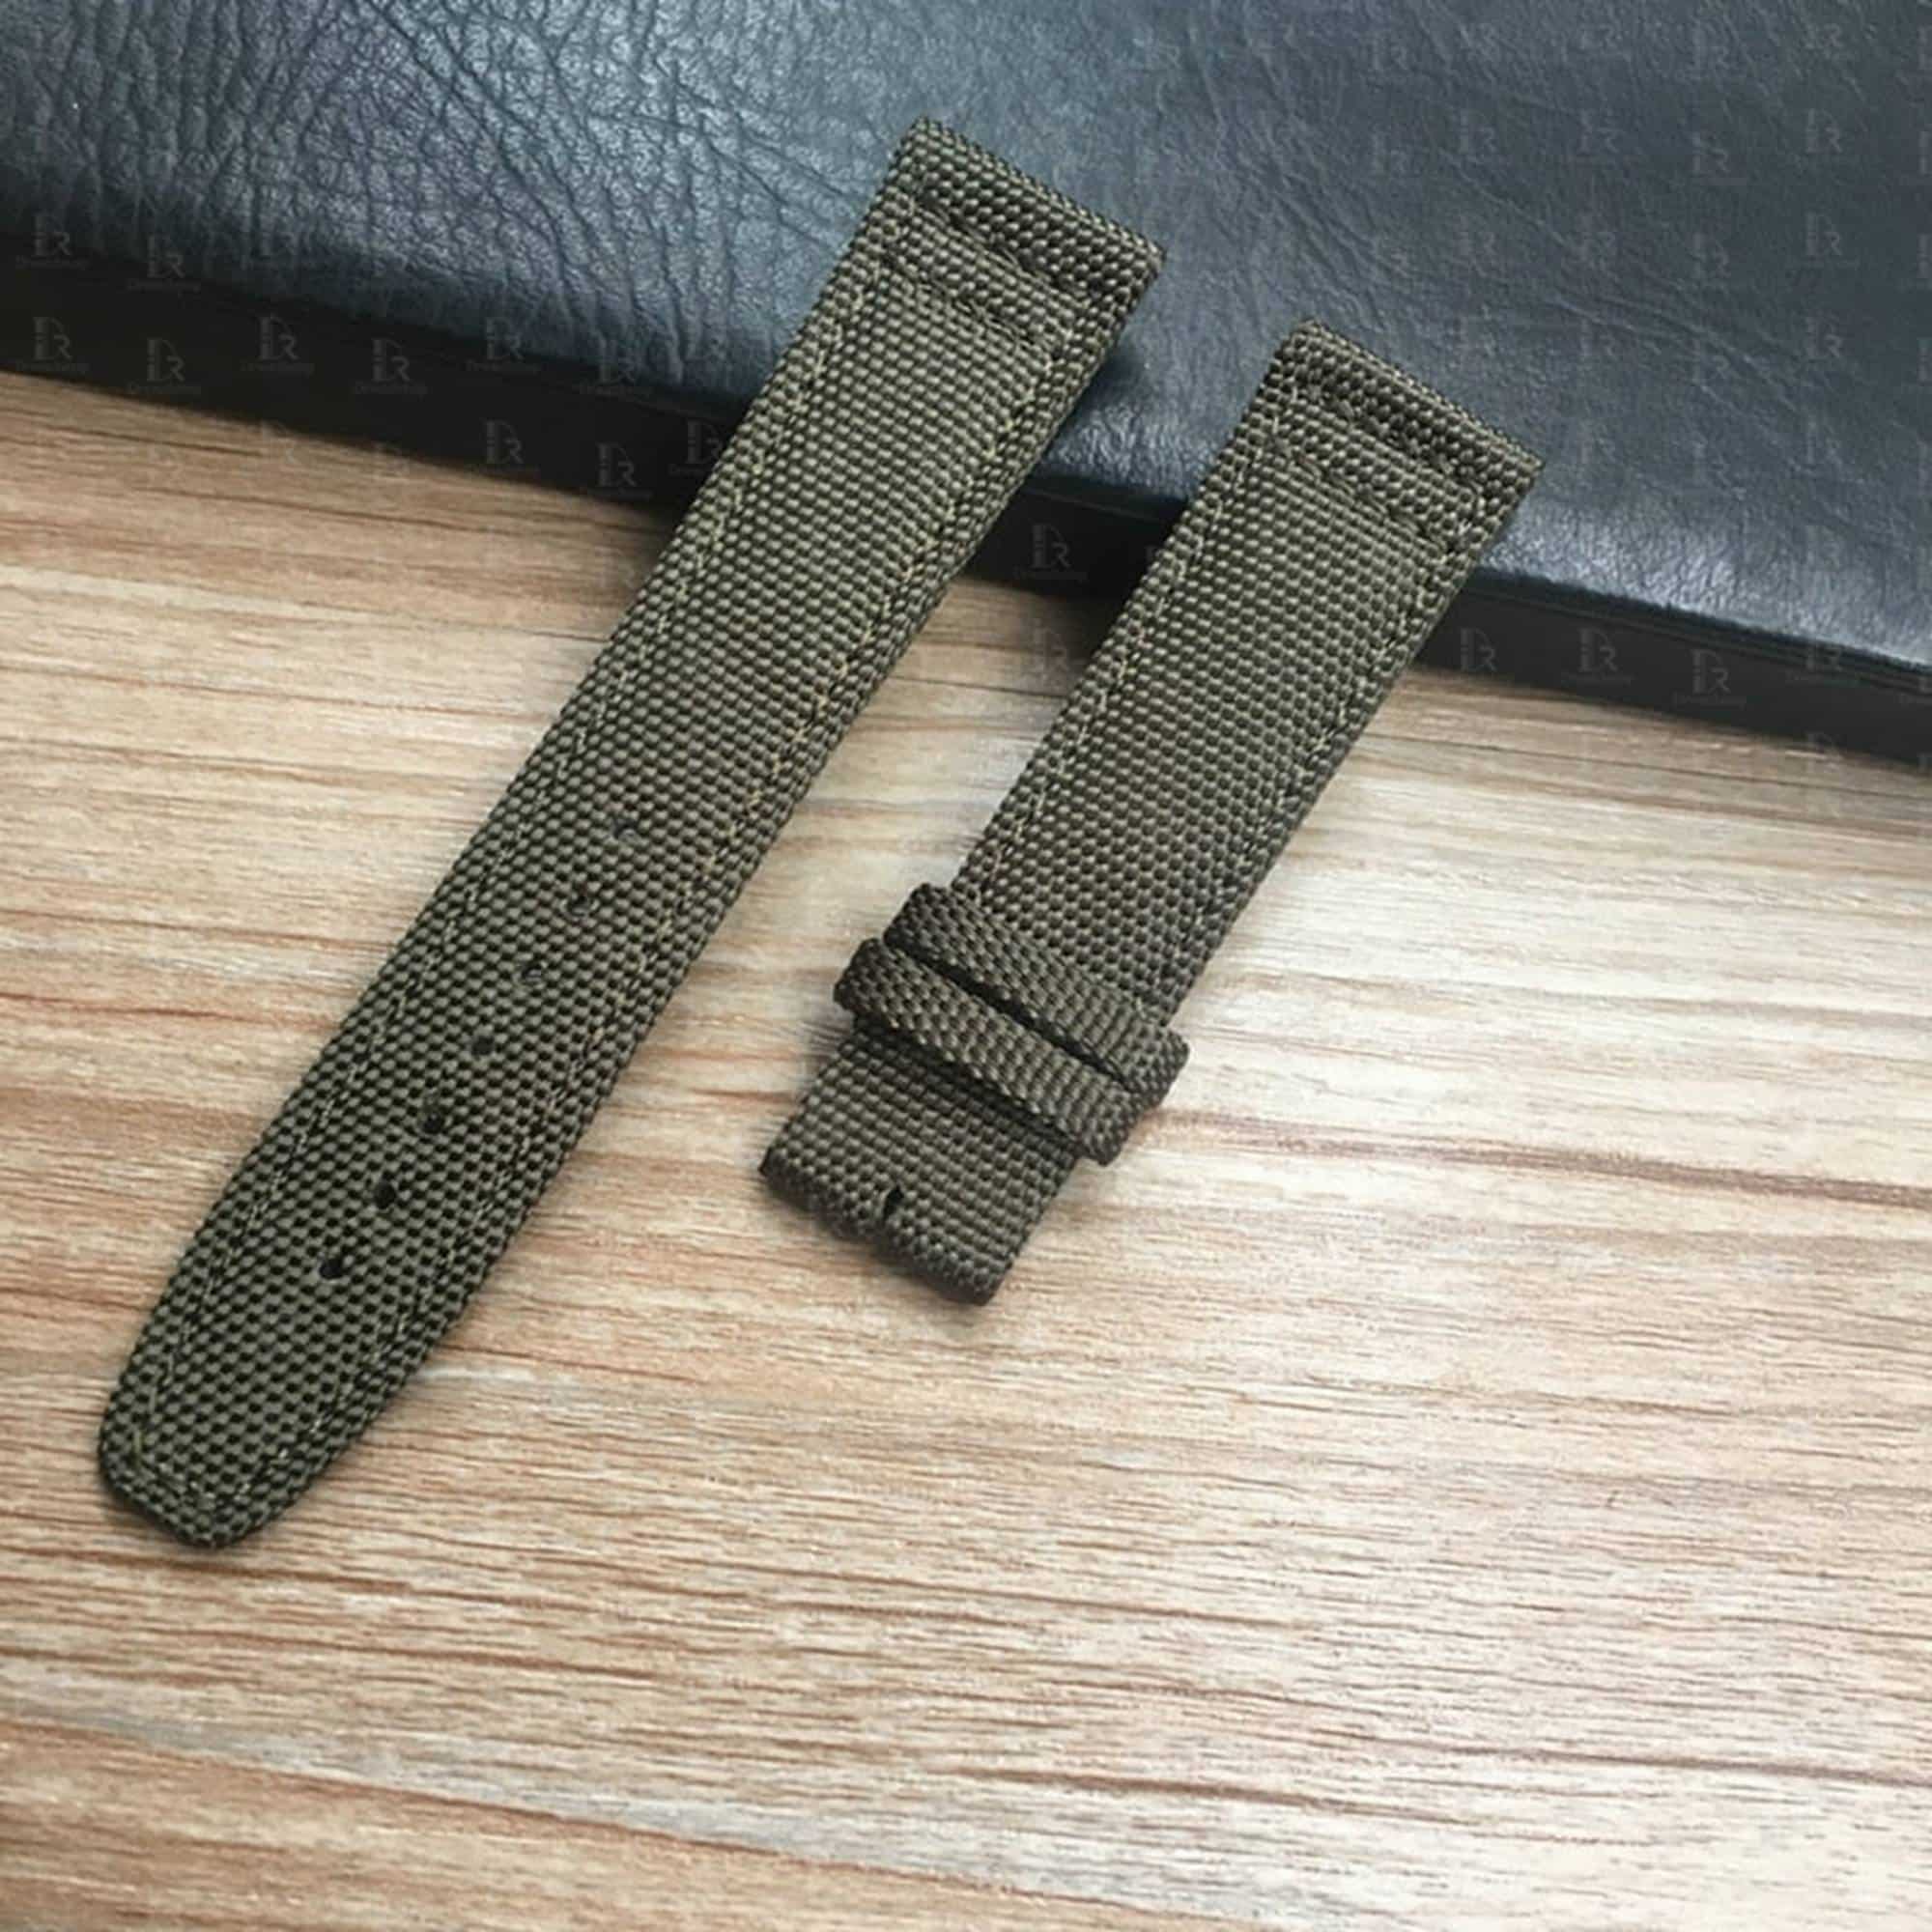 Green Textile canvas nylon fabric 20mm 21mm 22mm watch strap & watch band replacement compatible with IWC Big Pilot Top Gun luxury watches - shop the premium watchbands and straps online at a low price